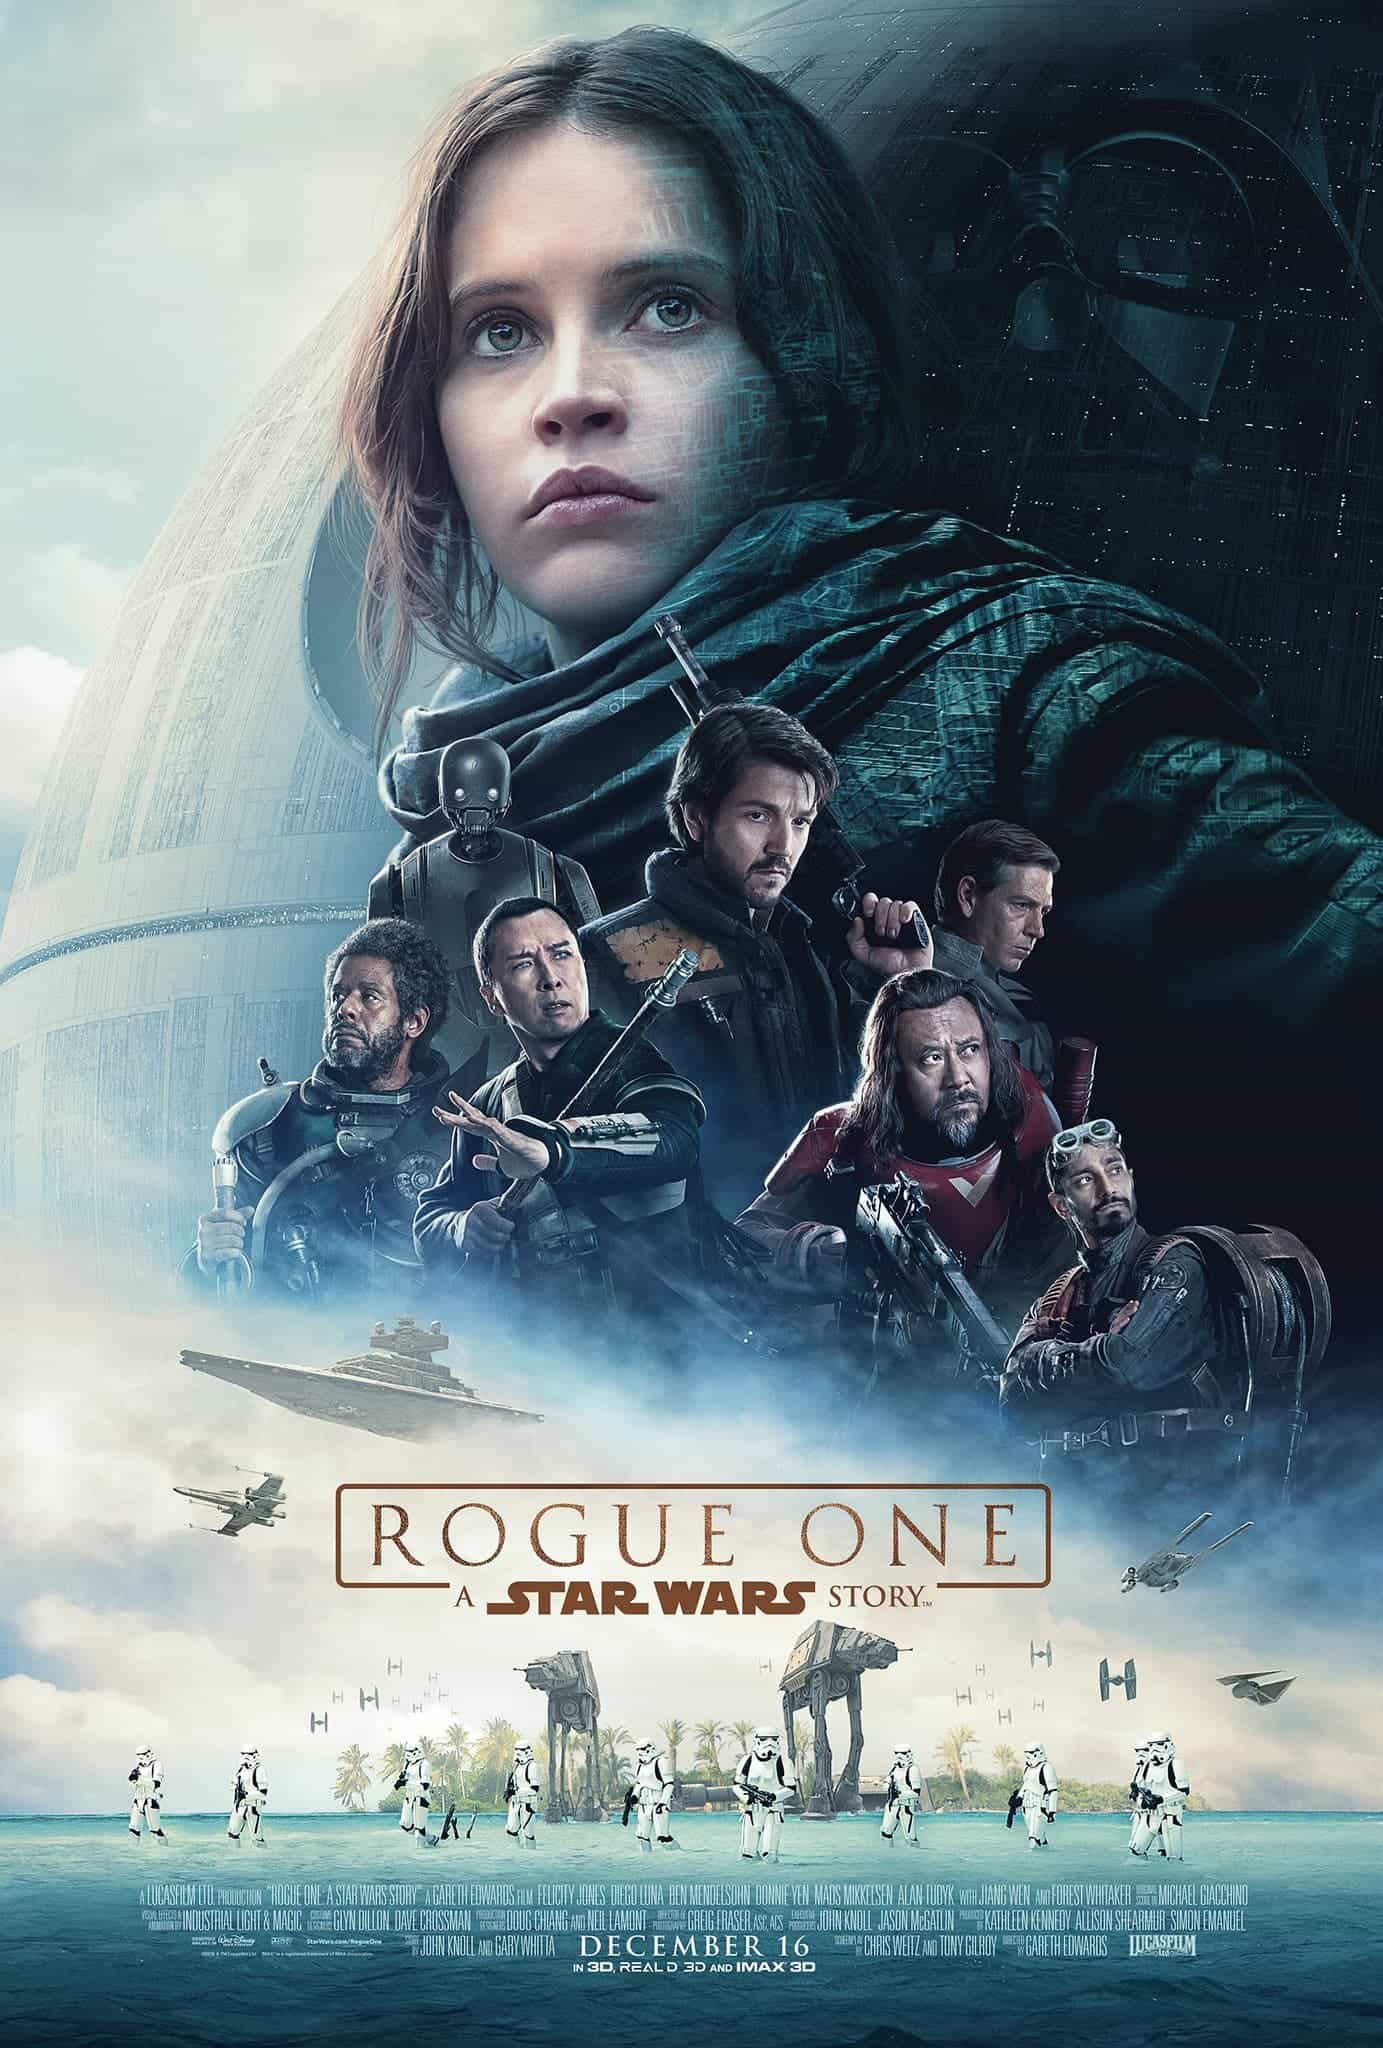 World Box Office Weekending 31st December 2016:  Rogue One still dominates the global box office